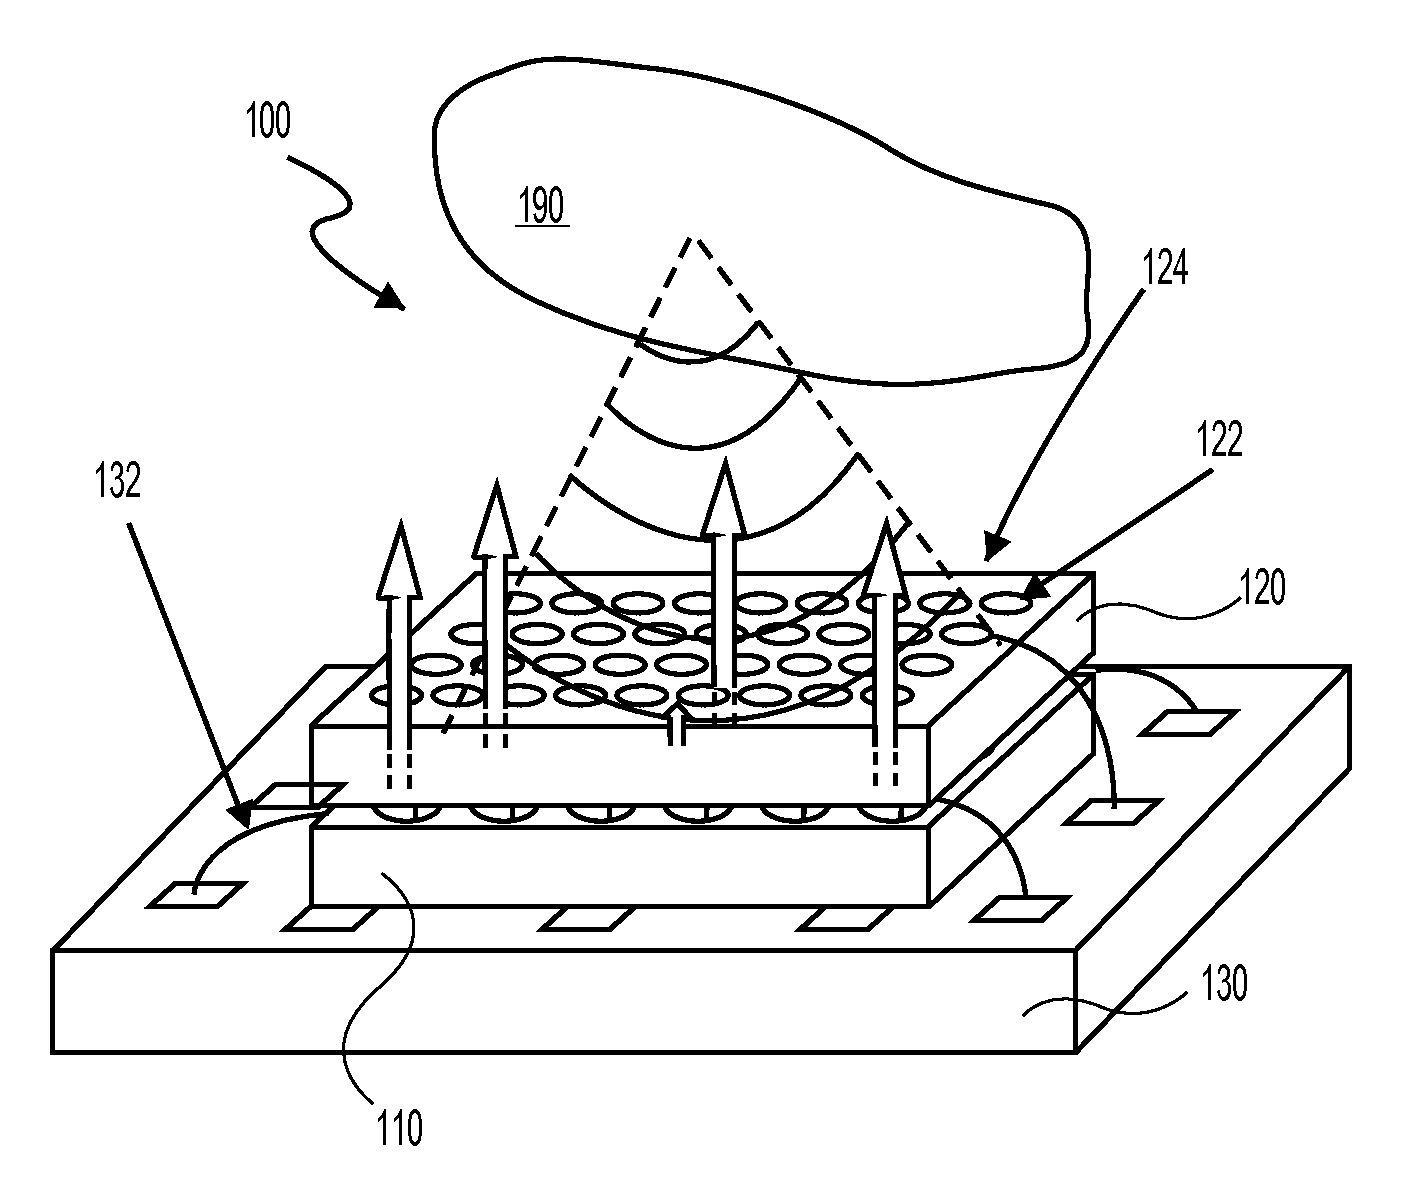 Photoacoustic imaging devices and methods of making and using the same